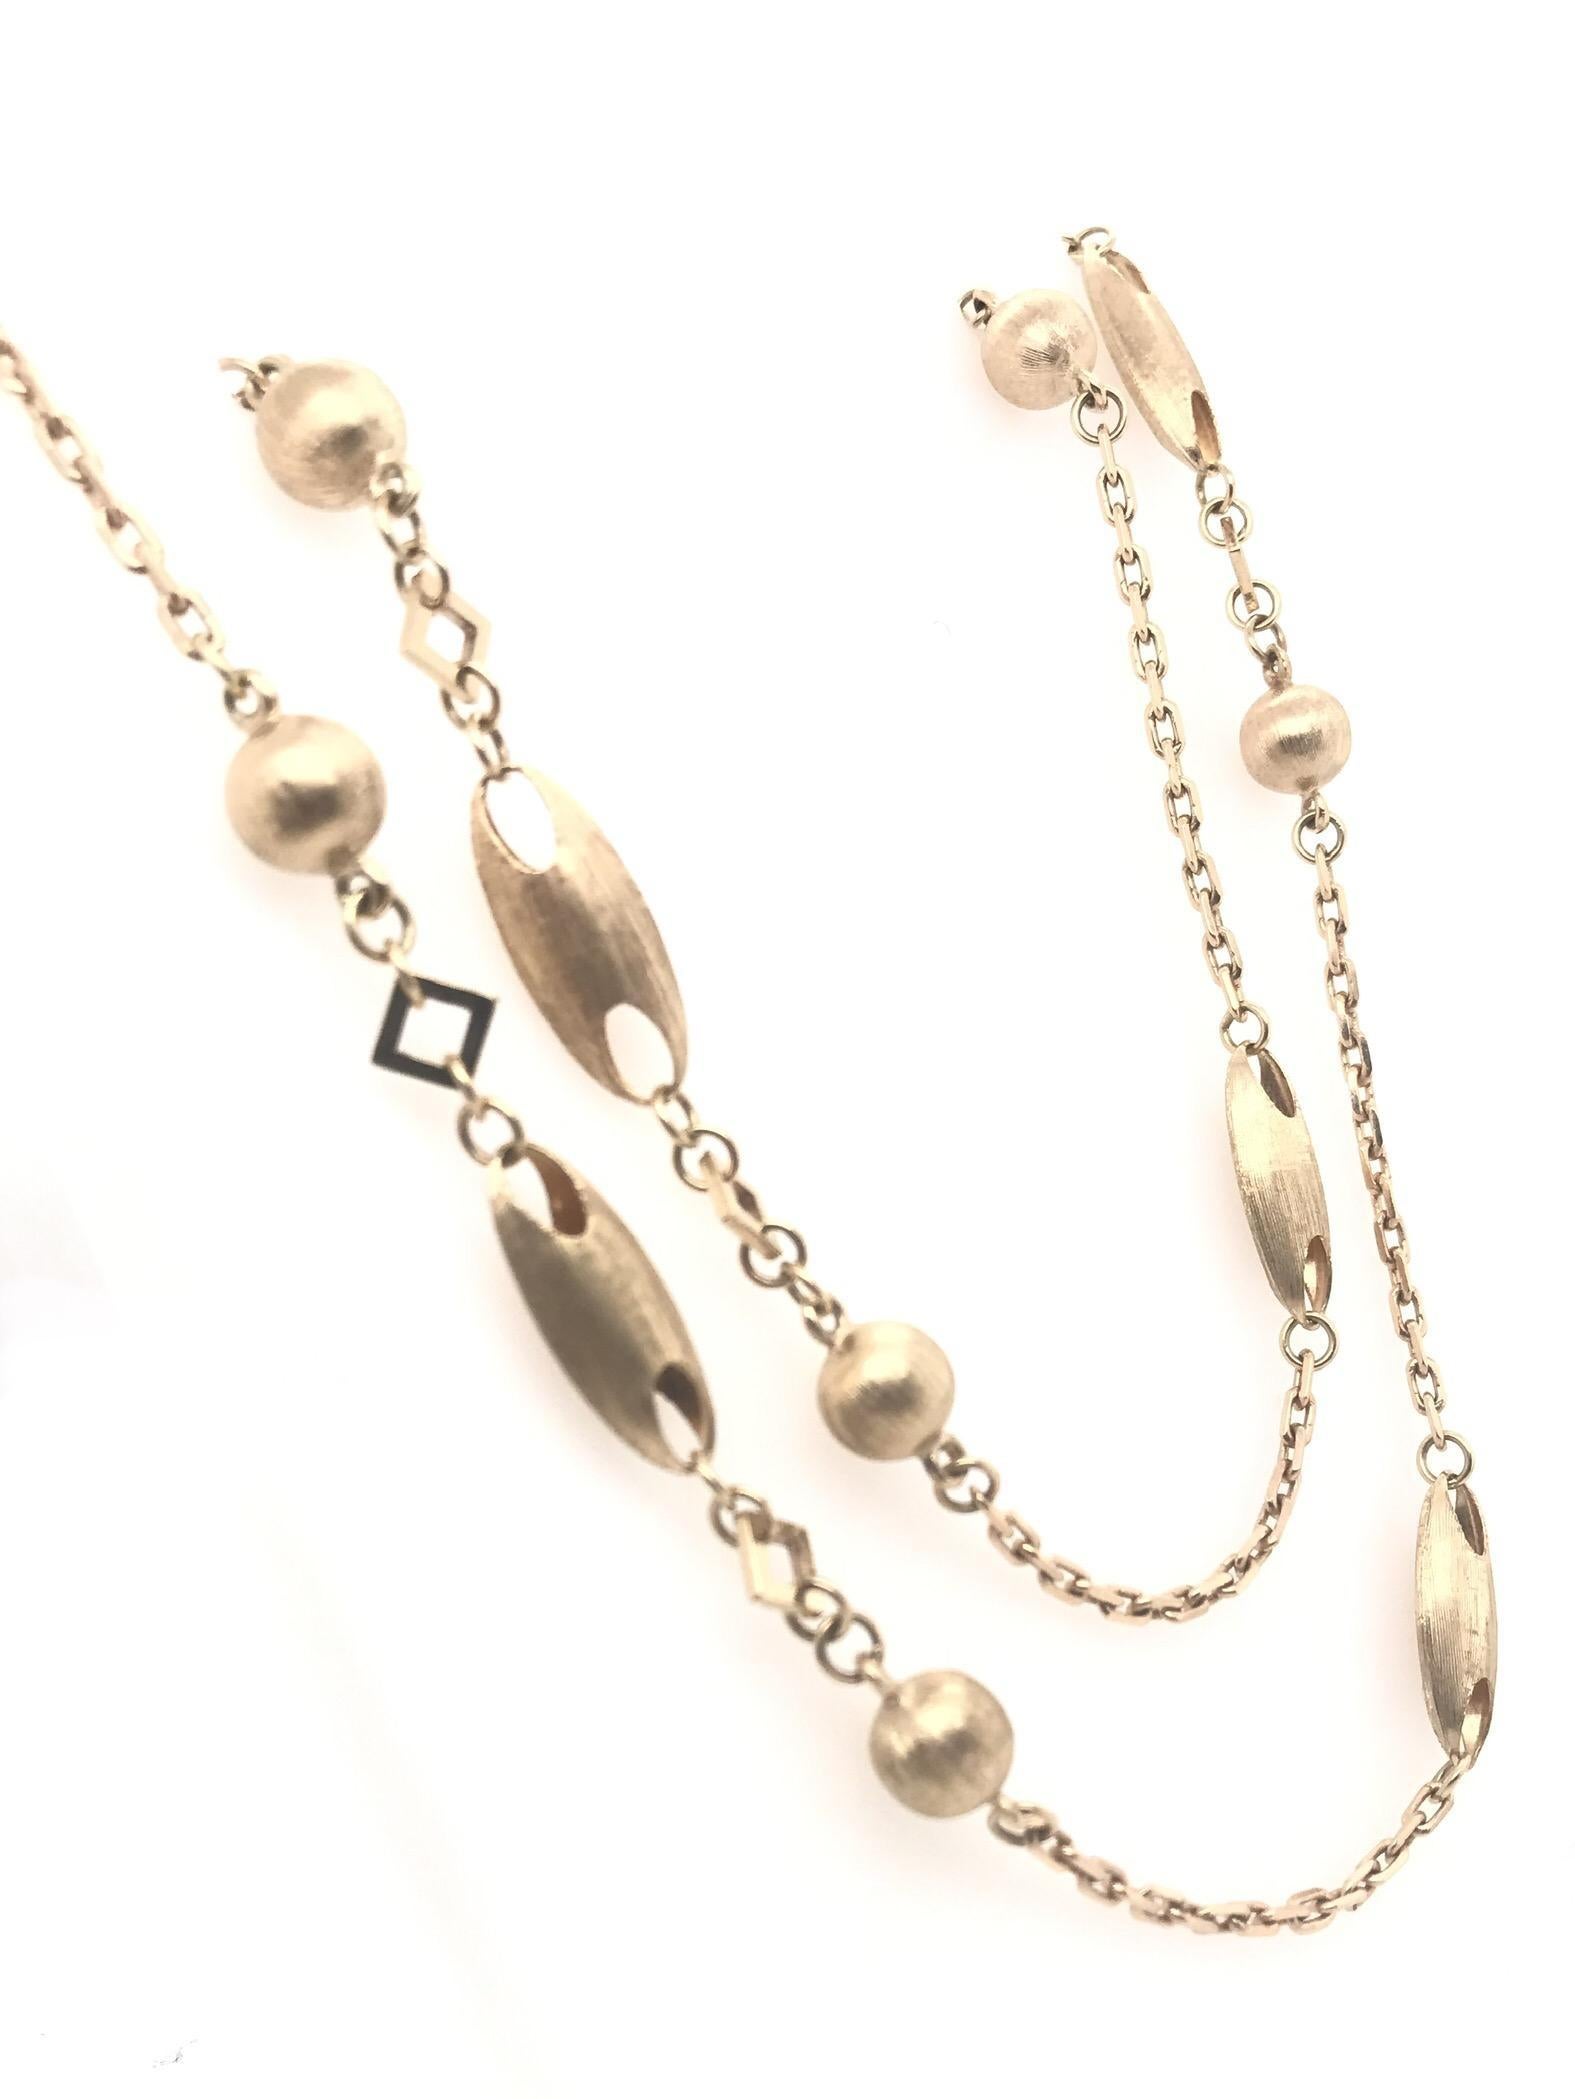 This contemporary estate piece is the perfect addition to your everyday jewelry collection. Layer it with your gold or platinum pieces for a more curated style. This 14K gold necklace measures approximately 27 inches in length and features